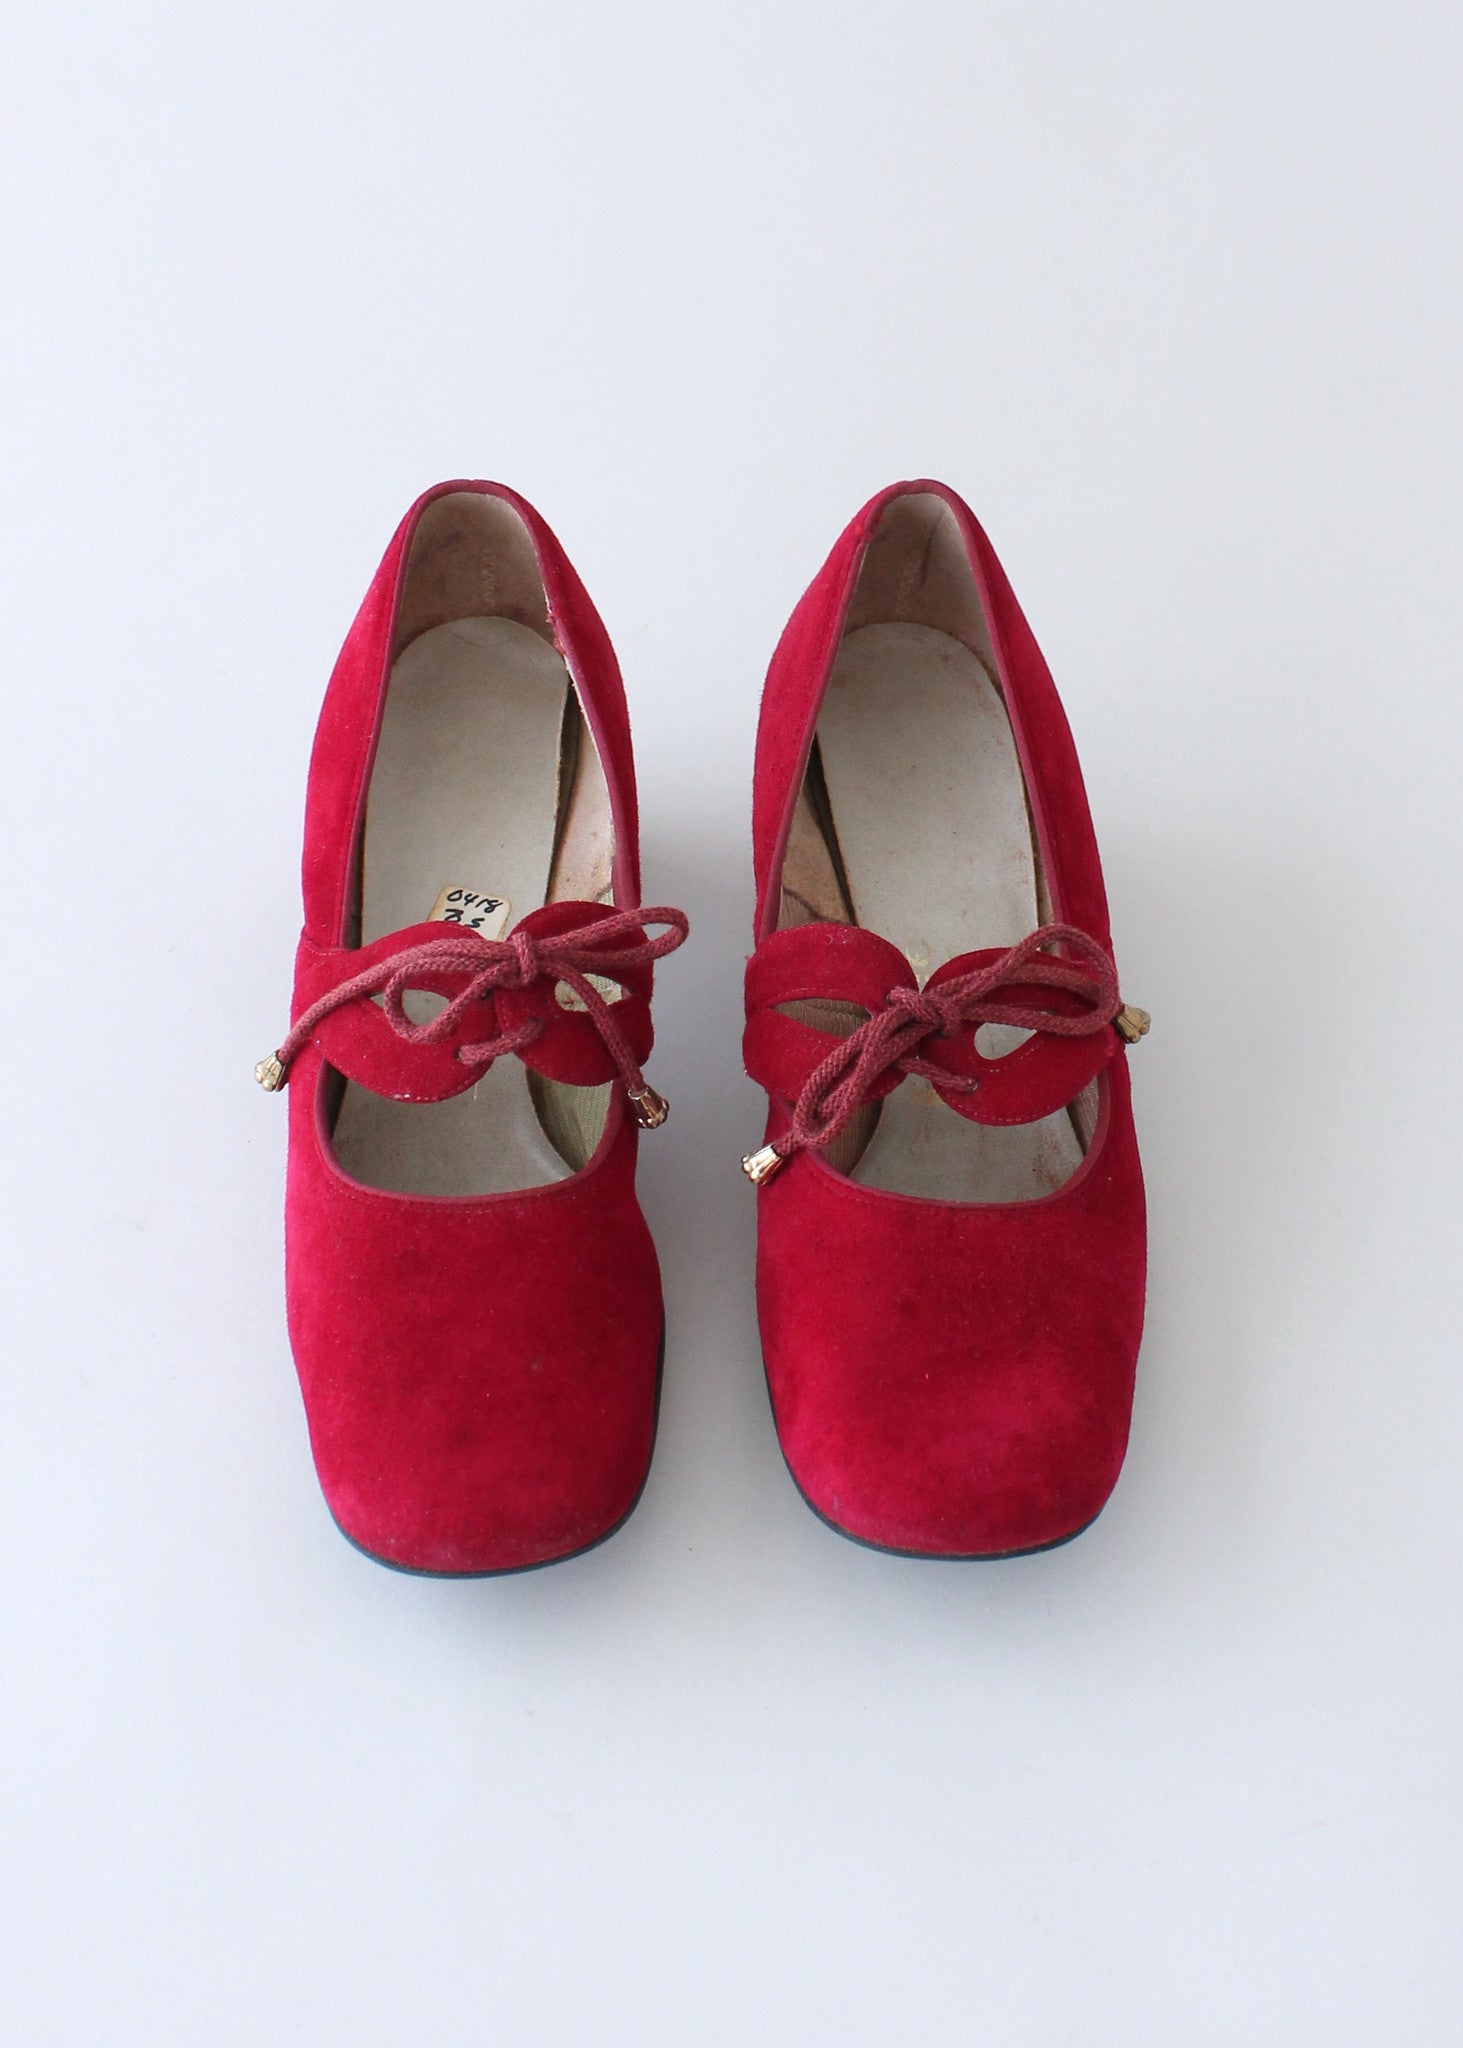 Vintage 1960s MOD Red Mary Janes Shoes - Raleigh Vintage